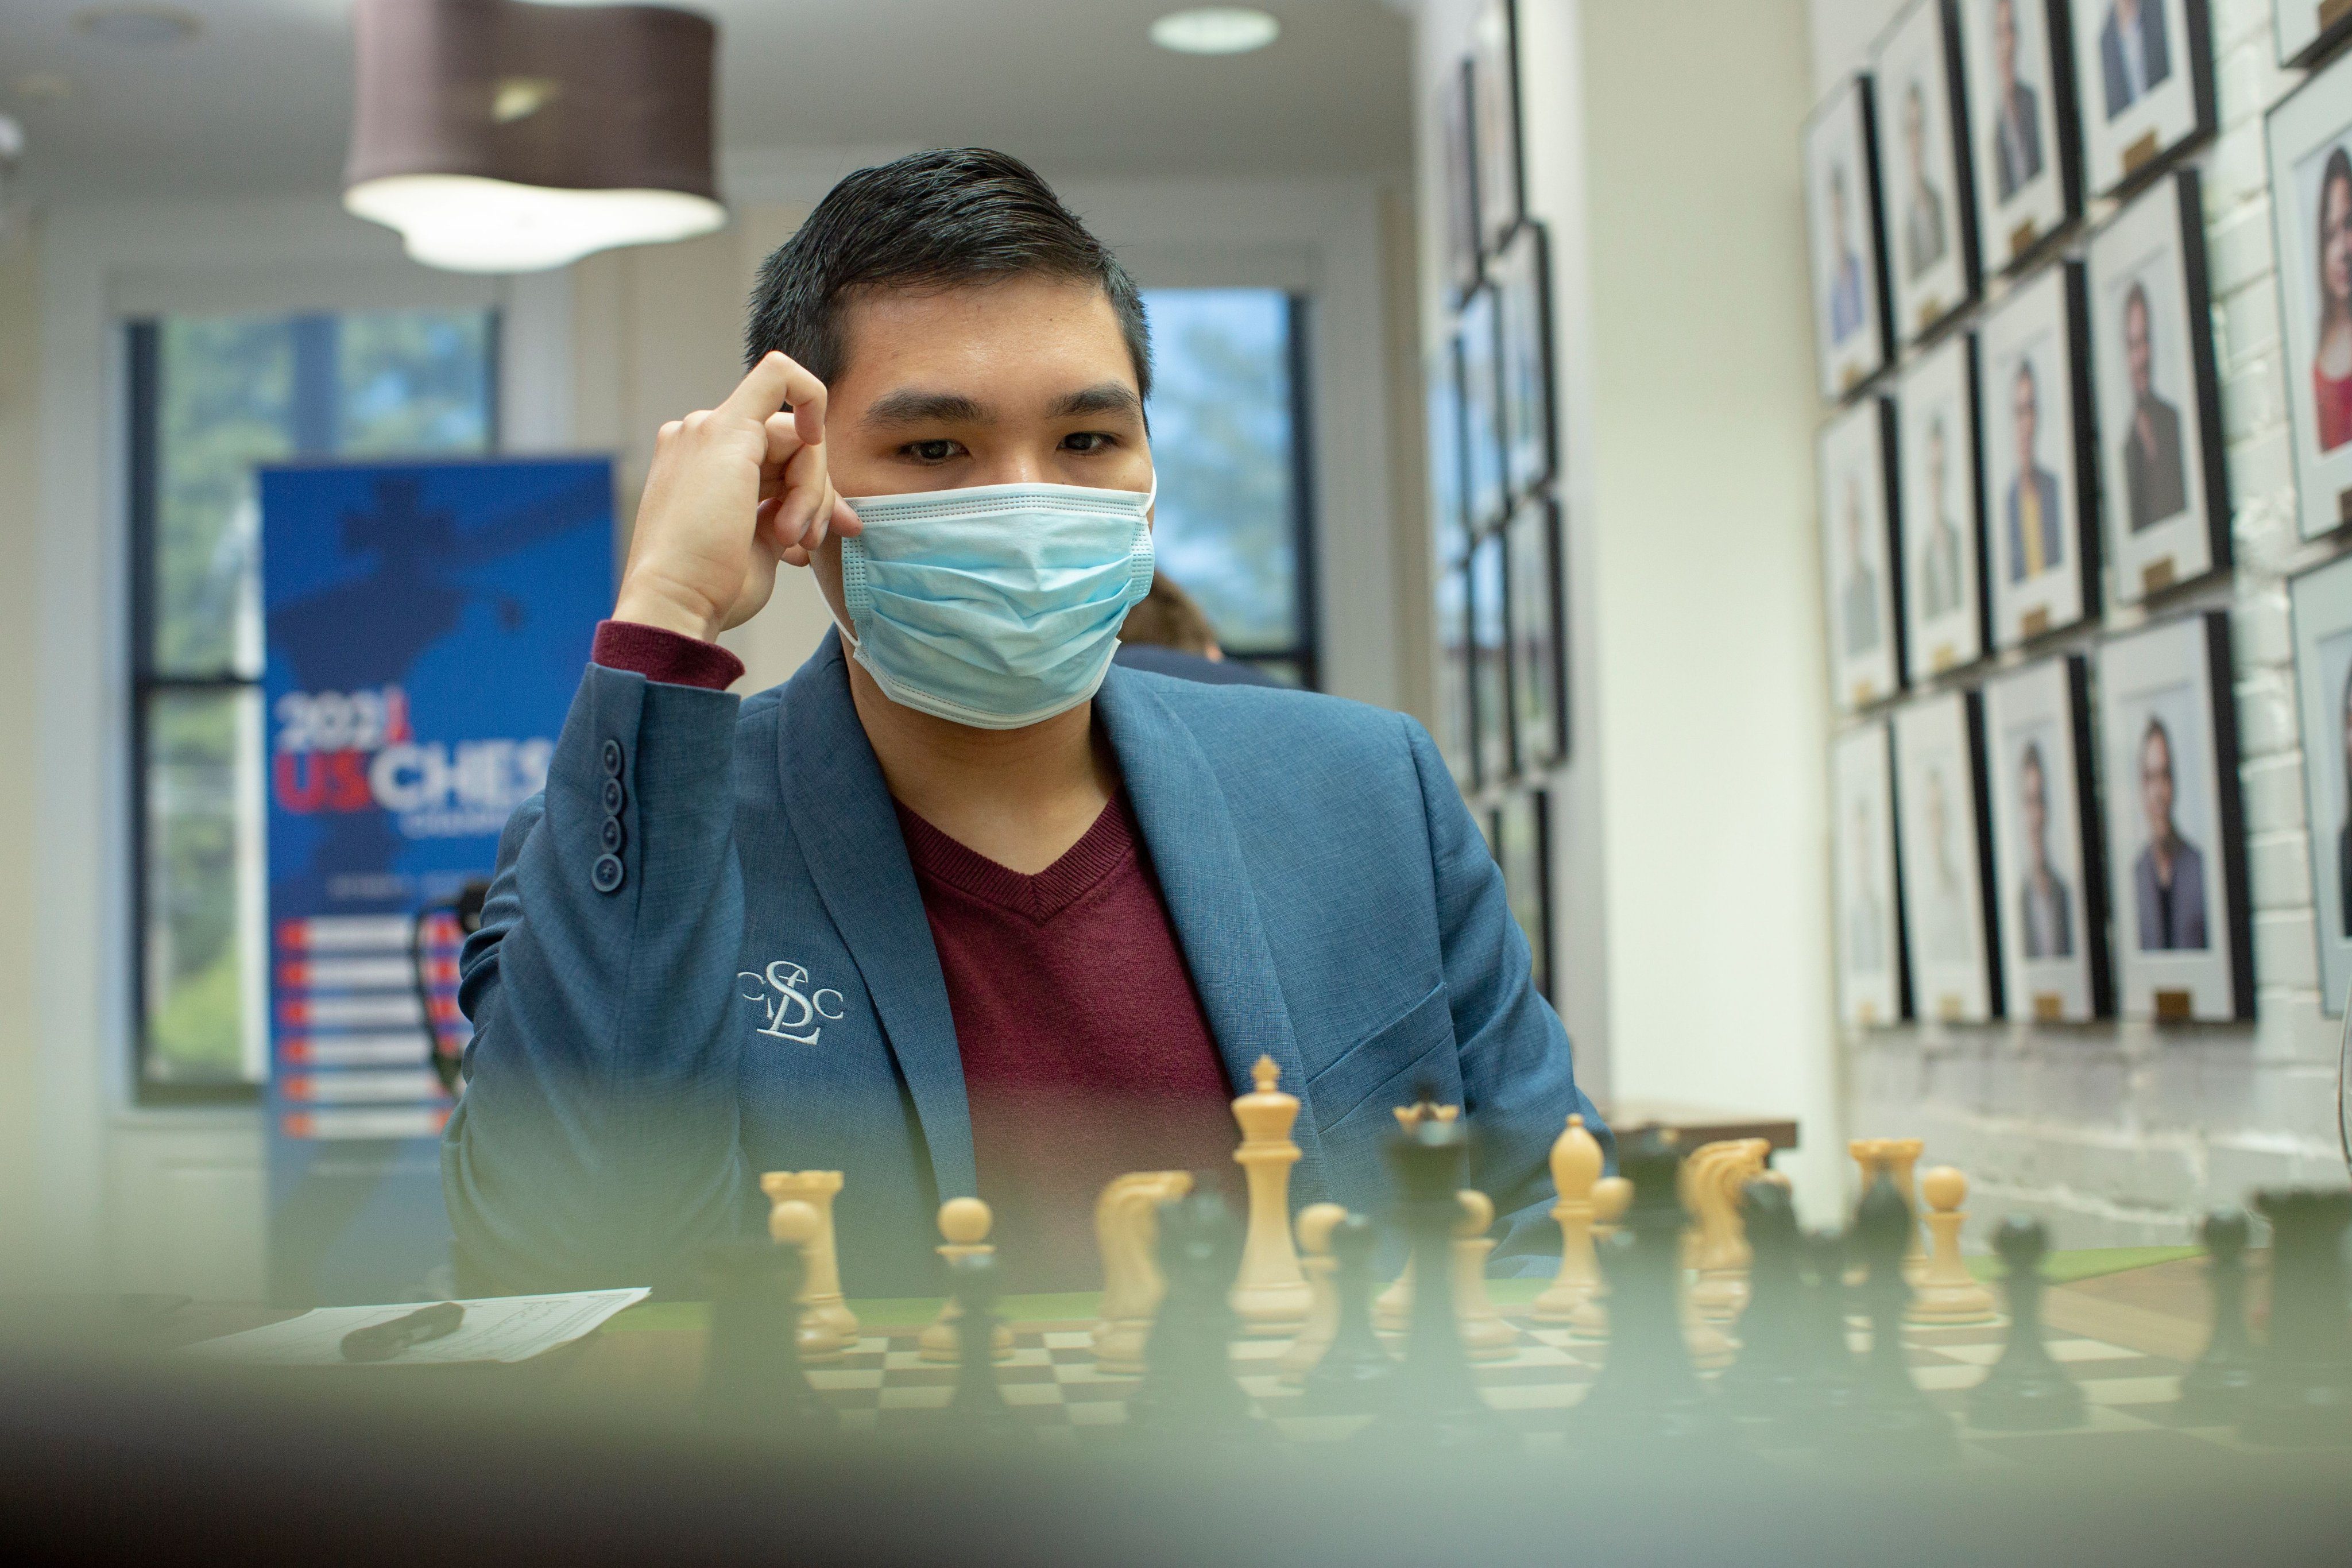 Round Six of FIDE Grand Prix Leg Completed in Berlin